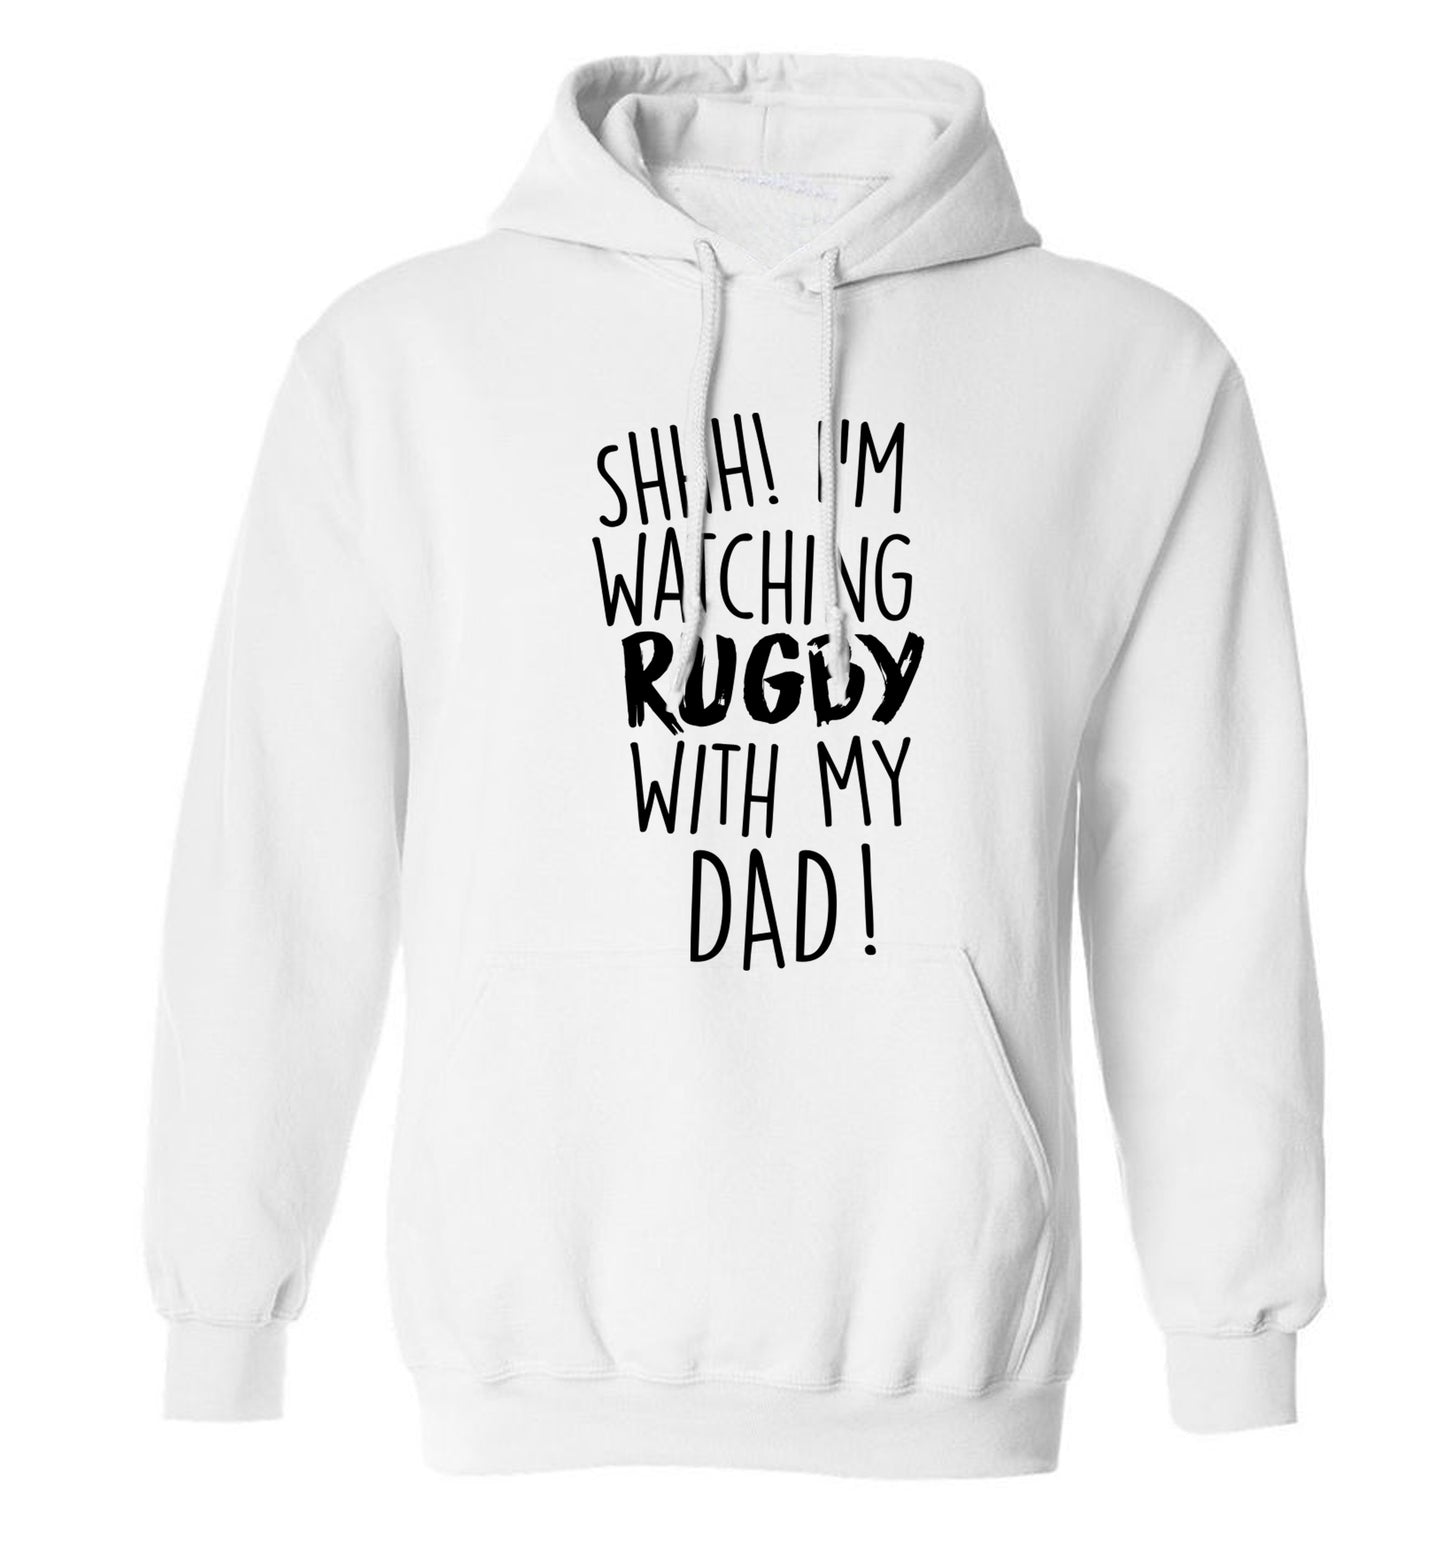 Shh... I'm watching rugby with my dad adults unisex white hoodie 2XL